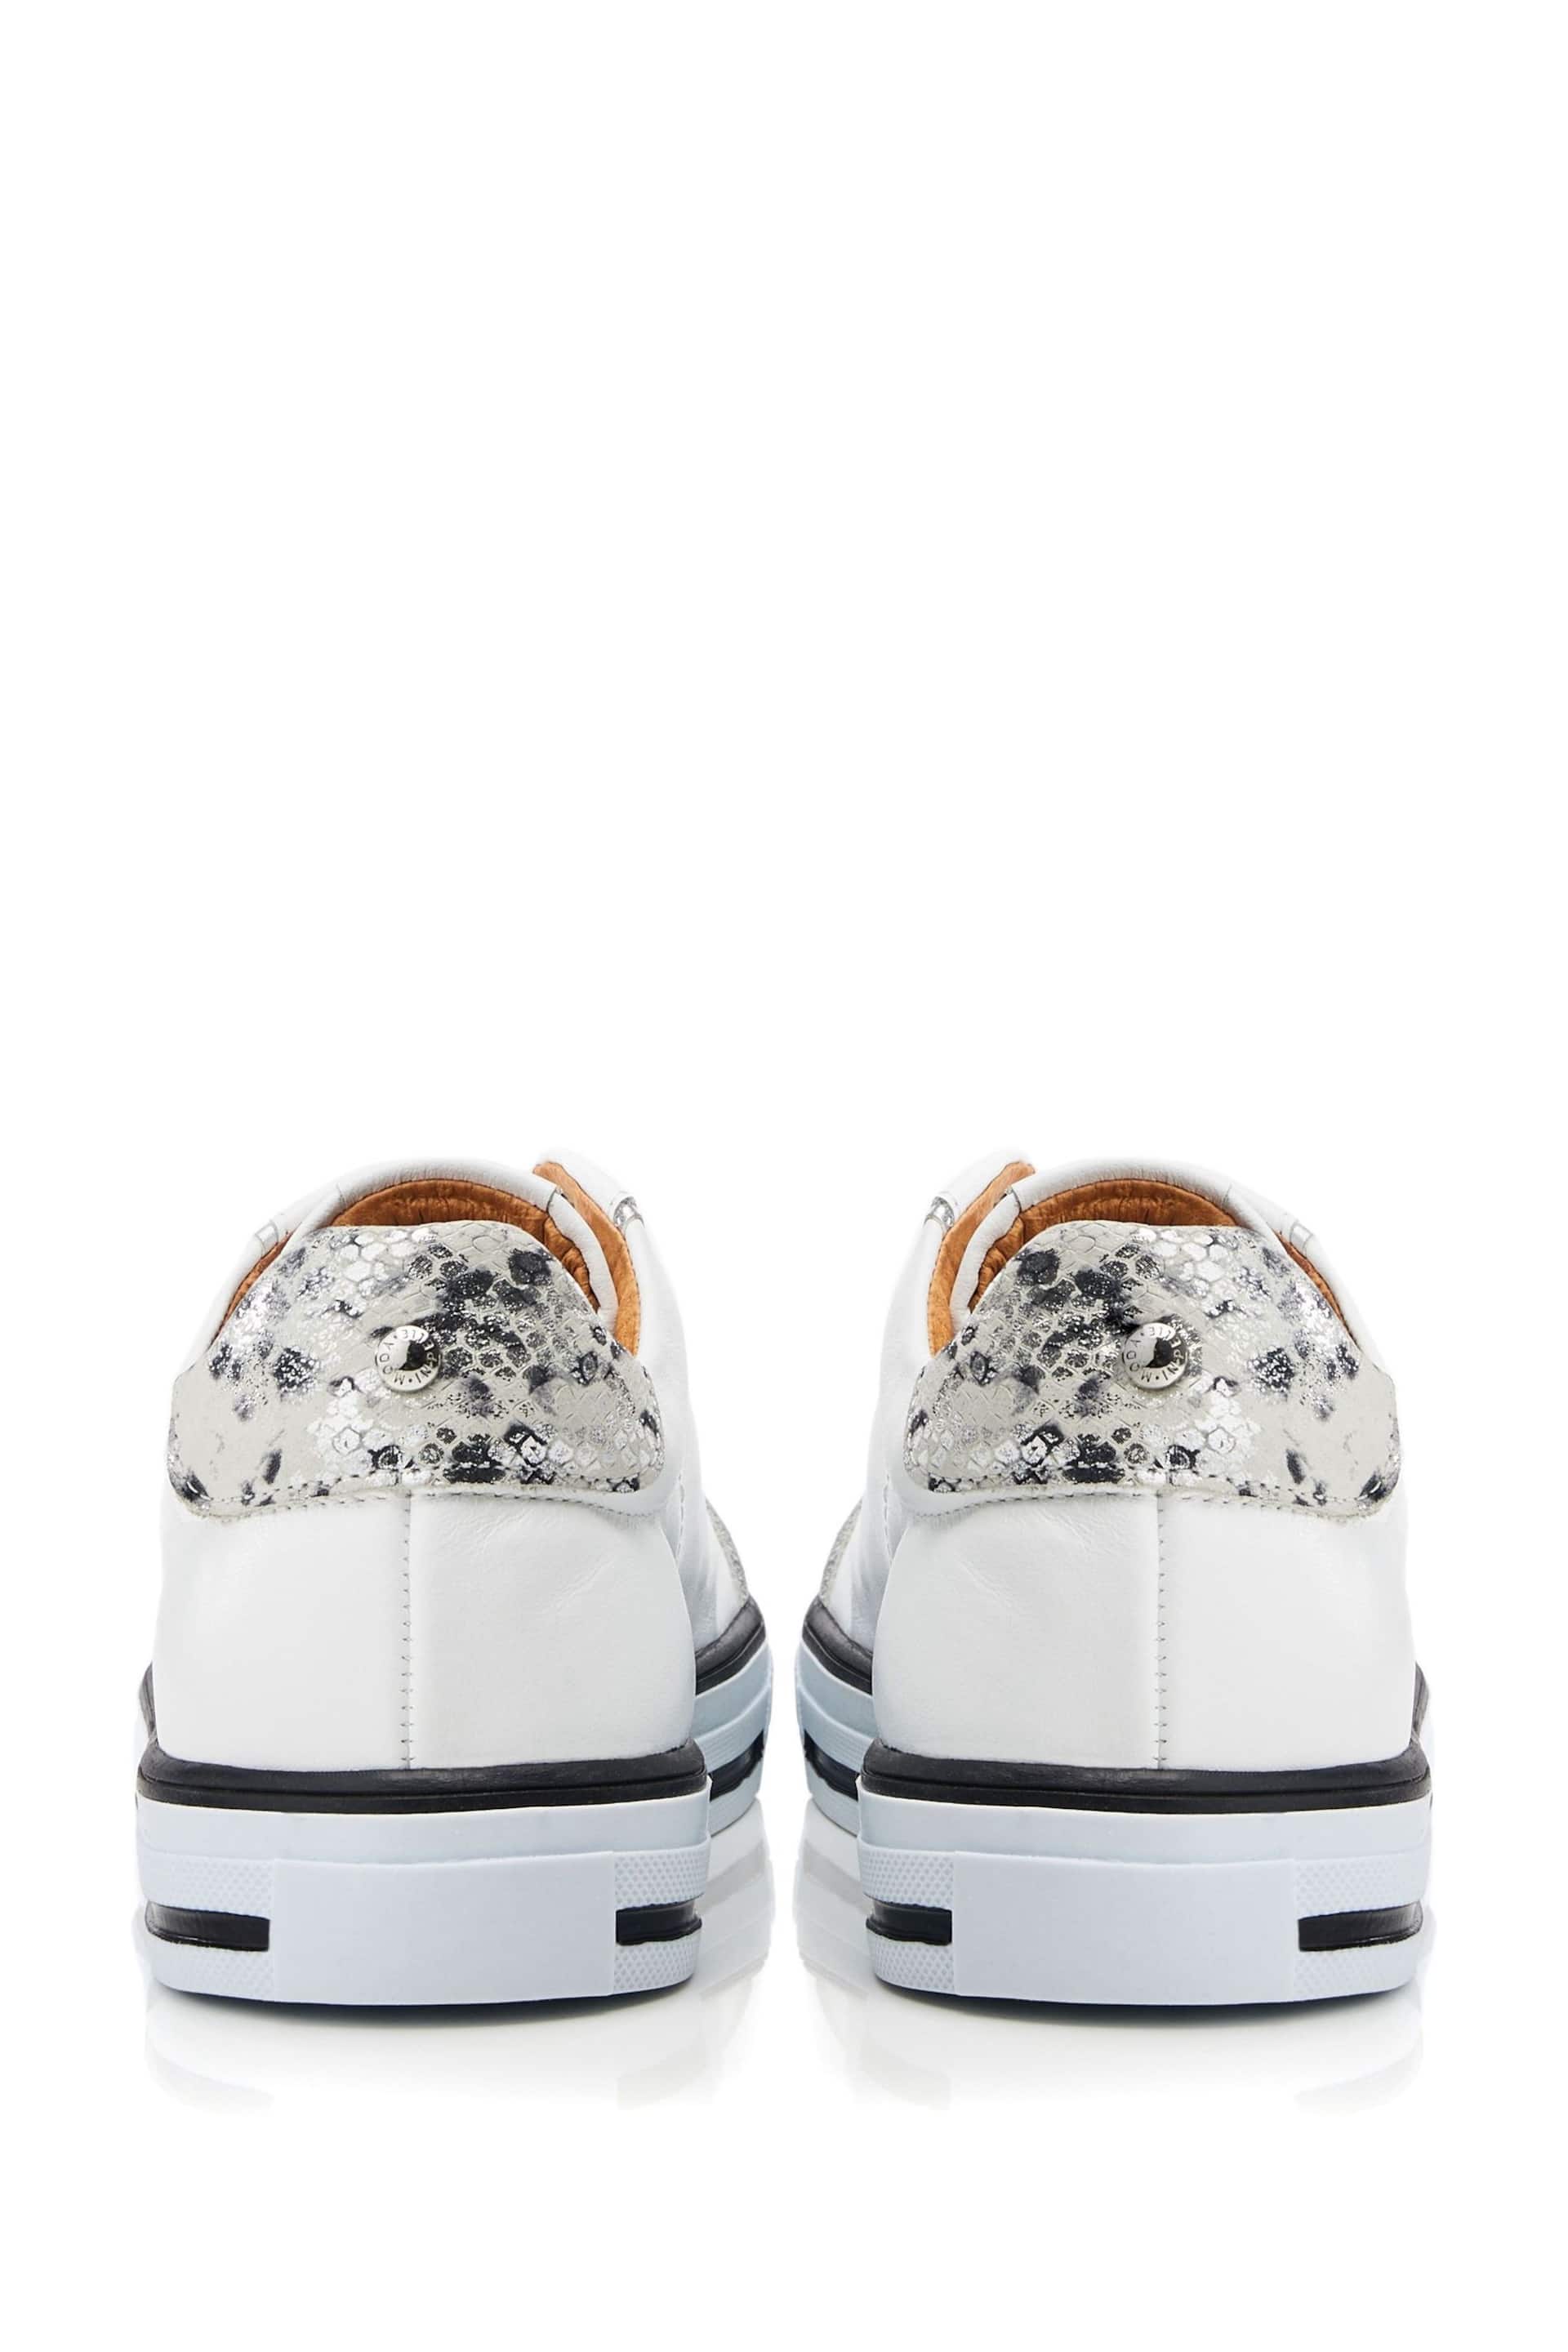 Moda in Pelle Bennii Elastic White Slip-Ons With Foxing Sole - Image 2 of 4